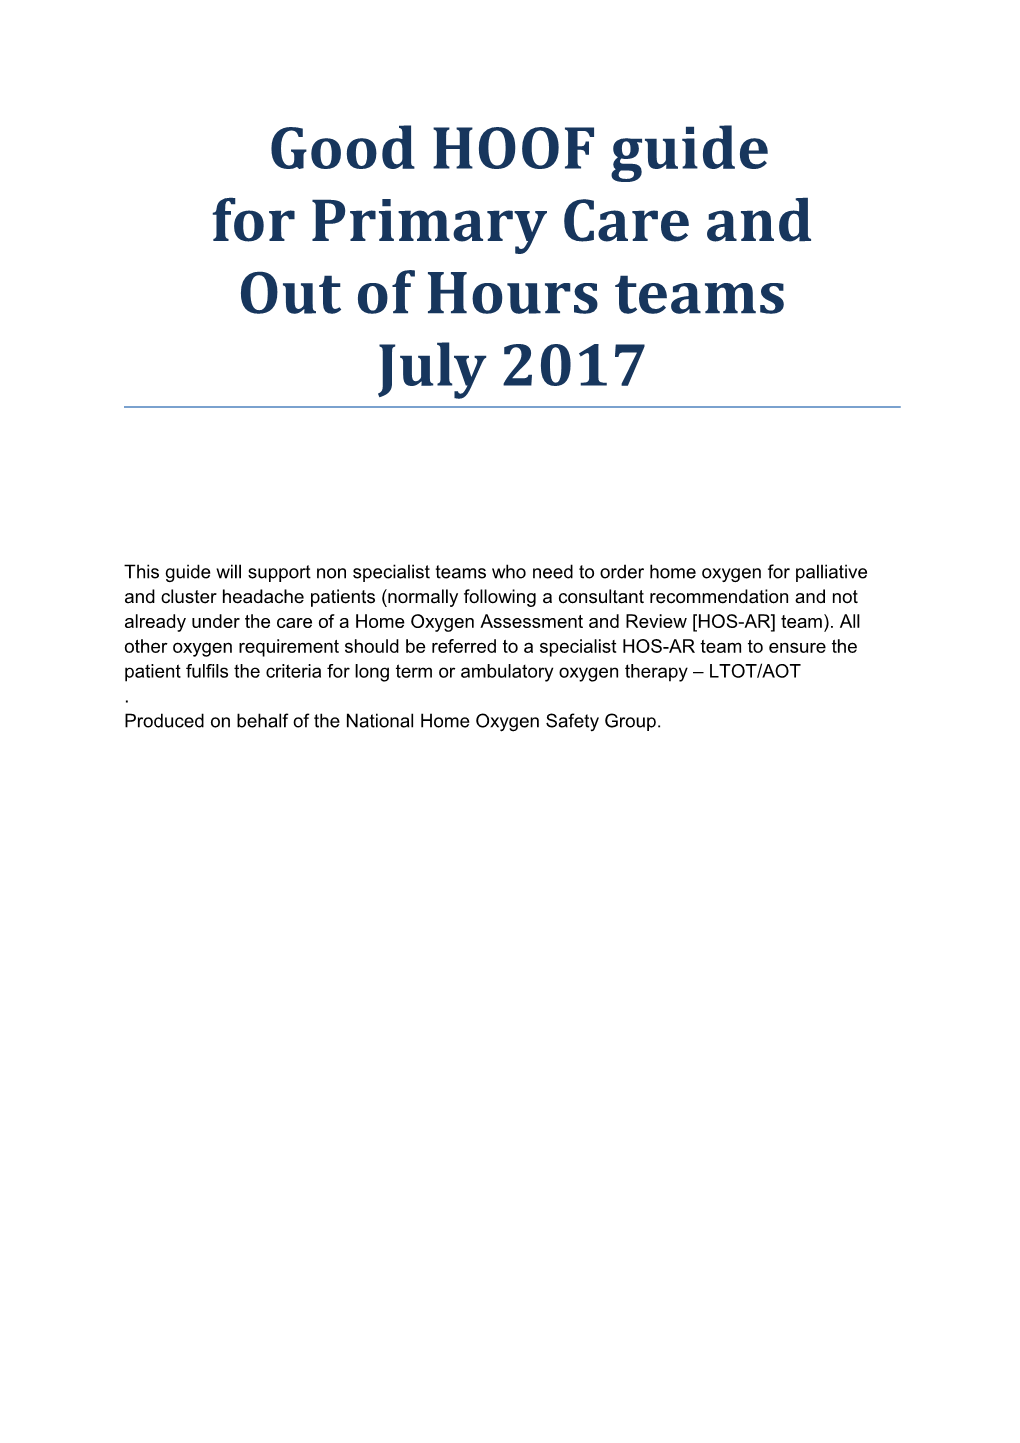 Good HOOF Guide for Primary Care and out of Hours Teams July 2017